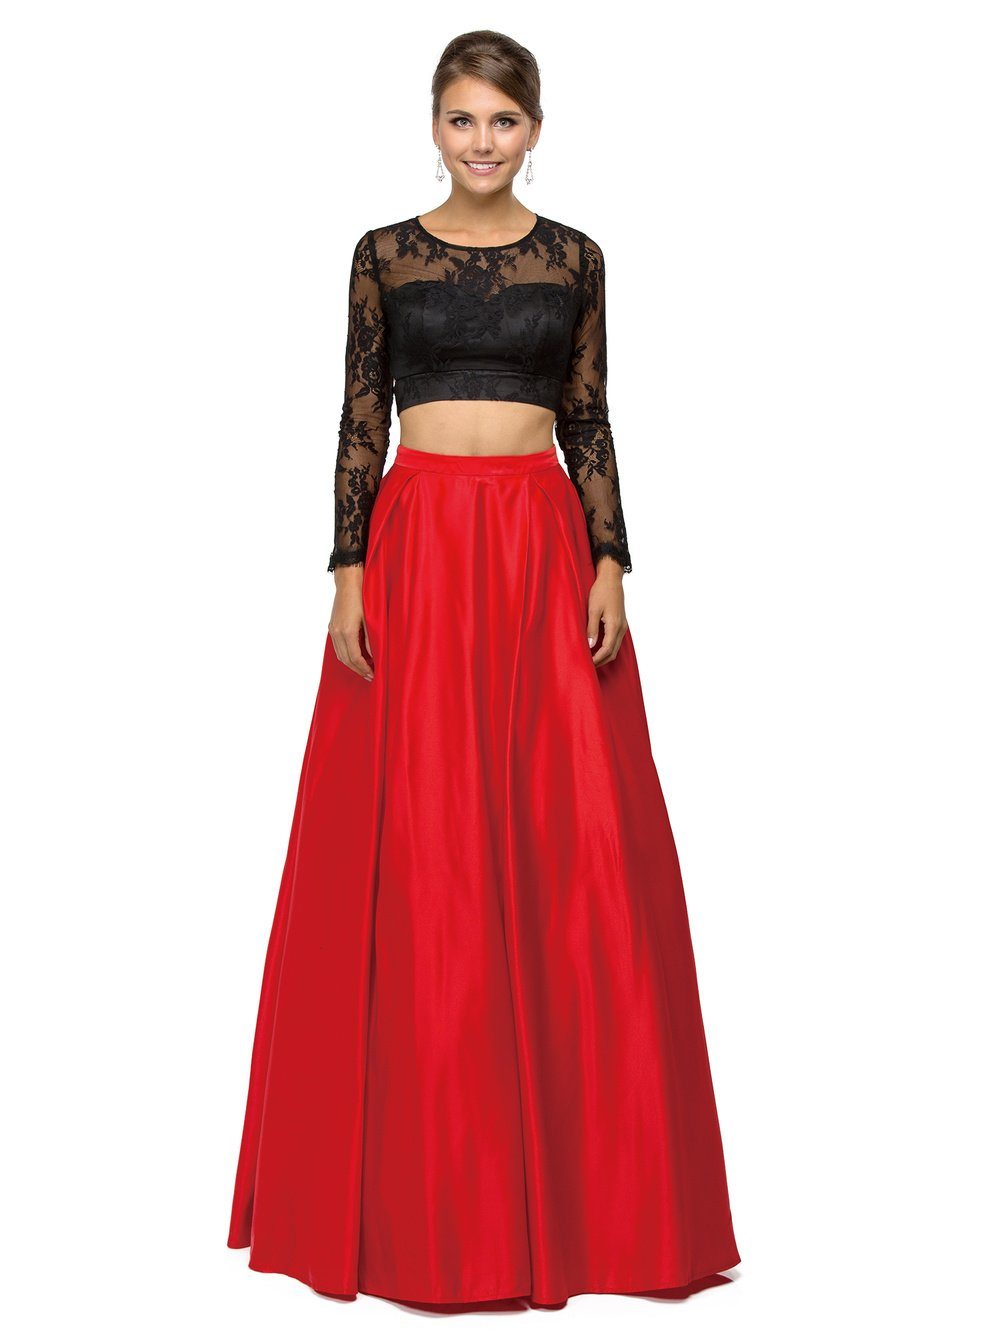 prom dress crop top and long skirt